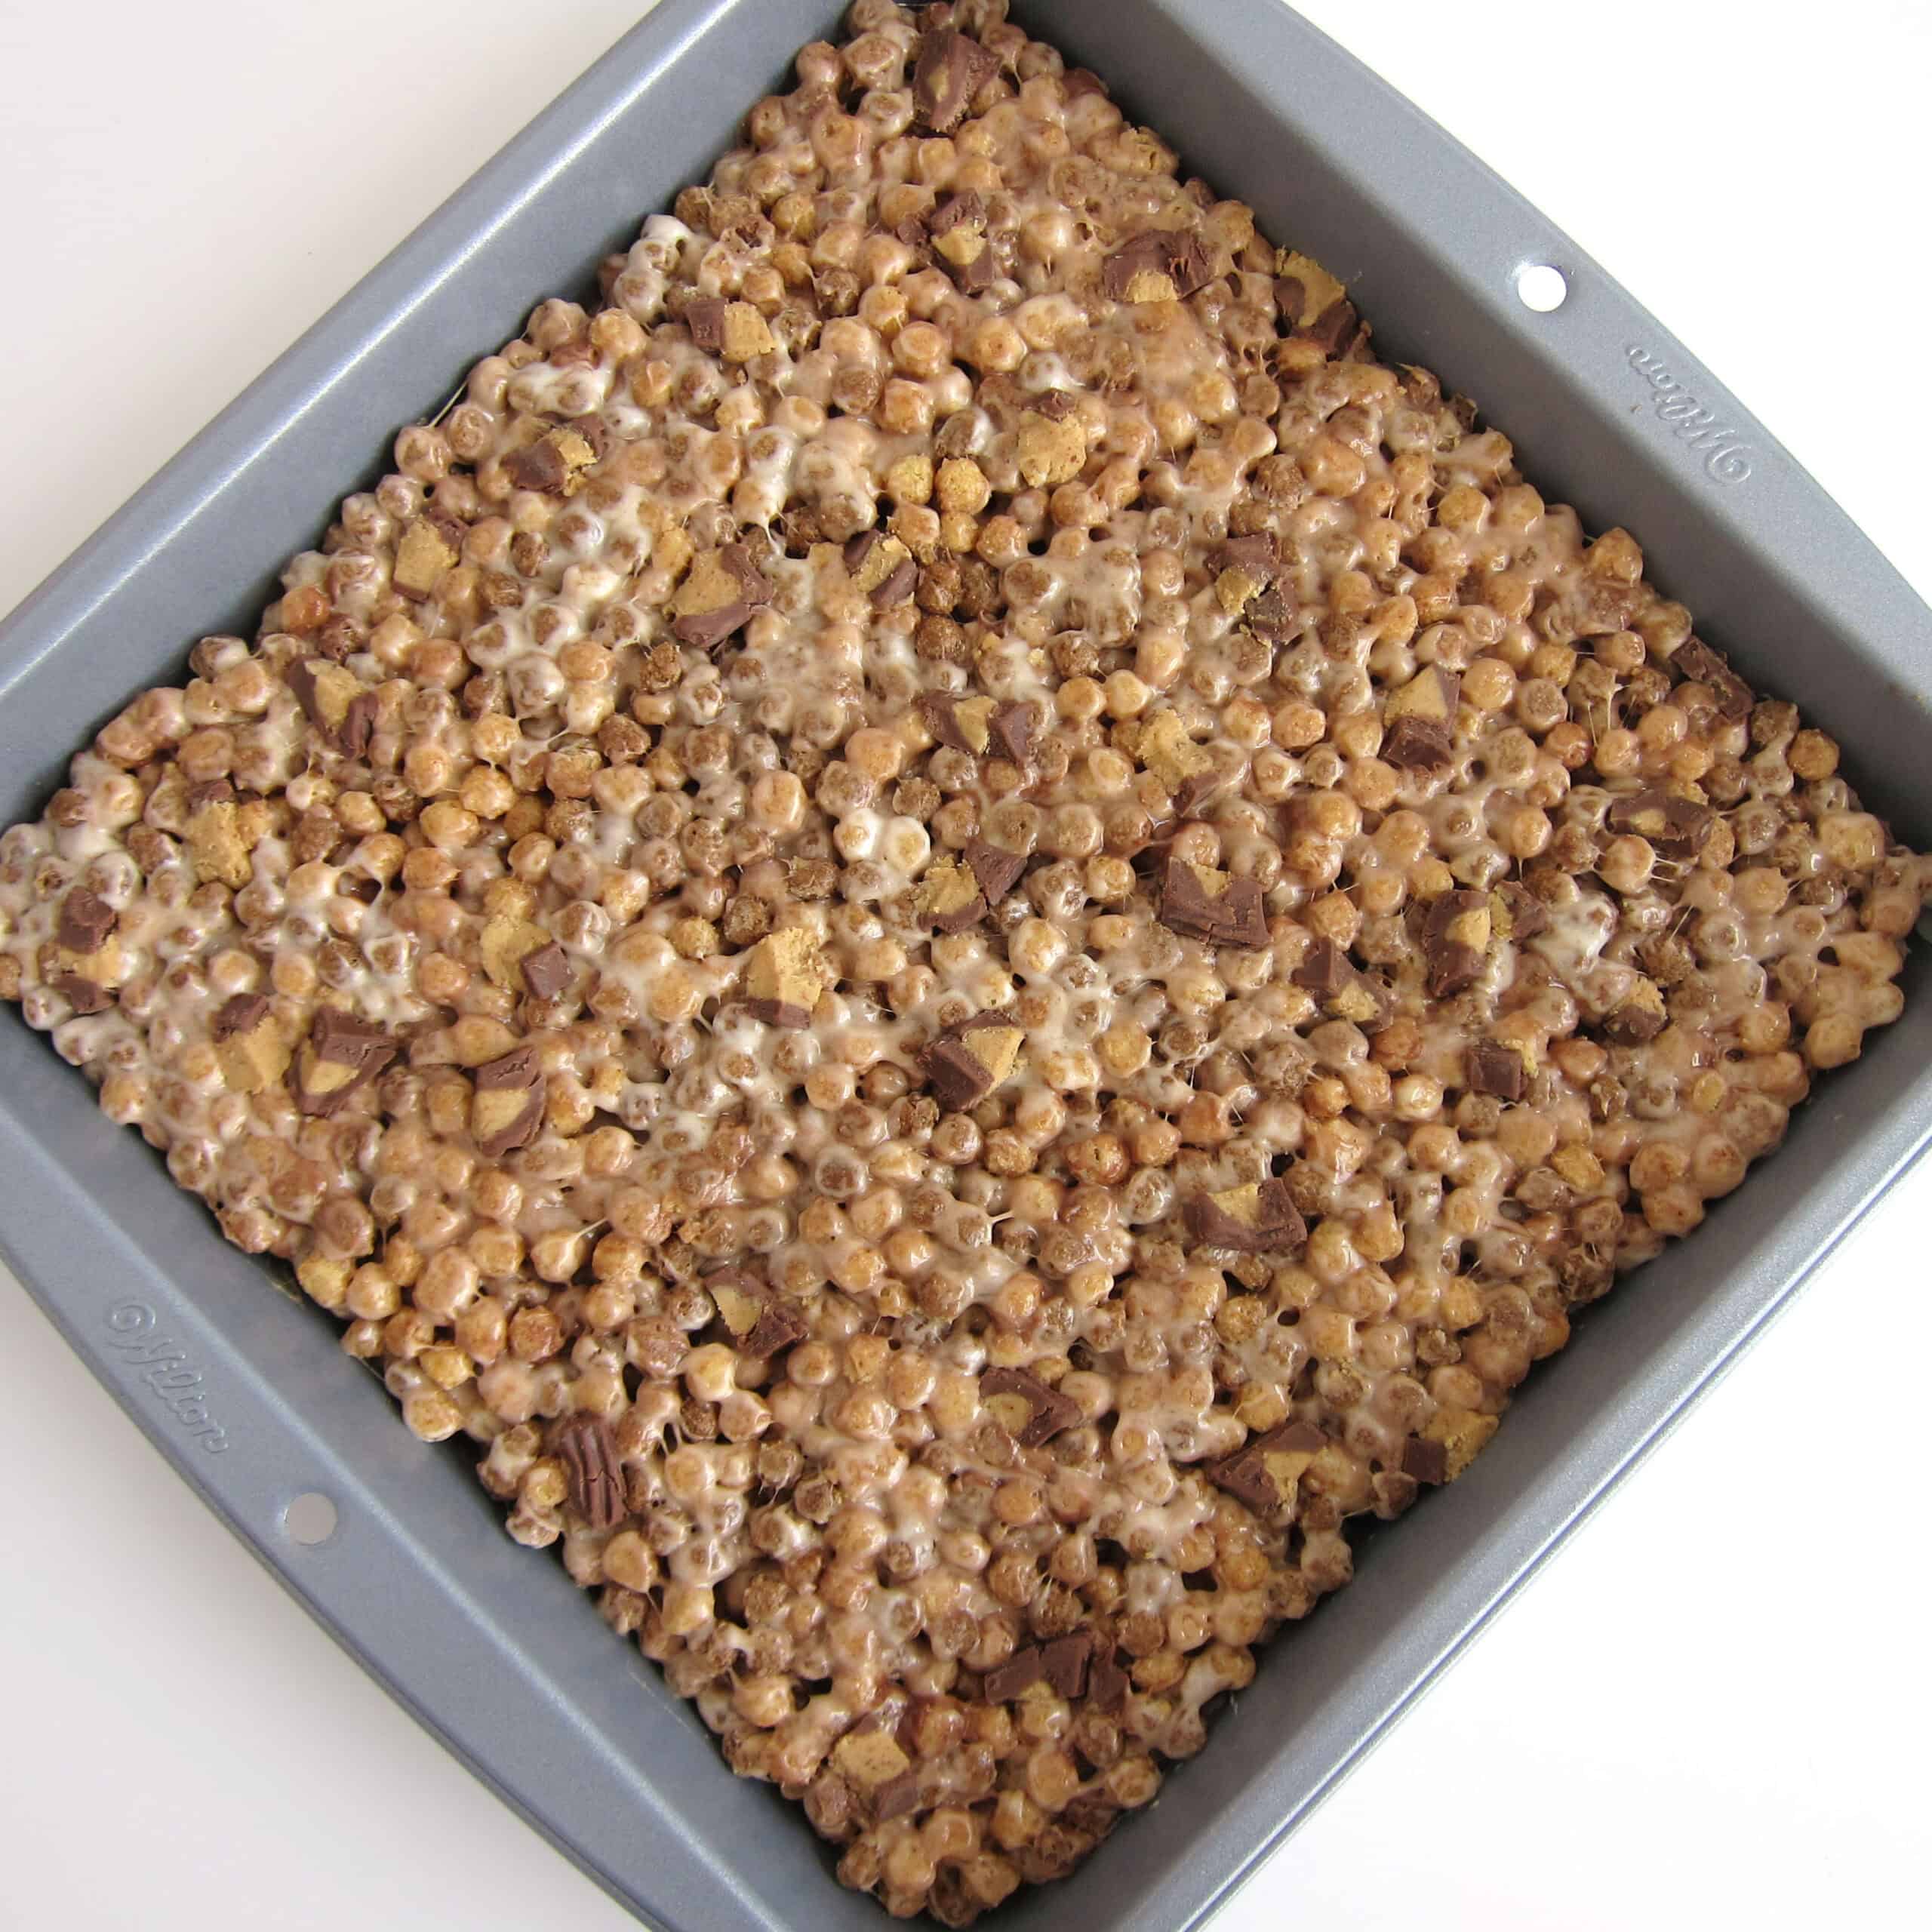 pan of homemade rice crispy treats made using Reese's Puffs Minis cereal and Reese's Cups.